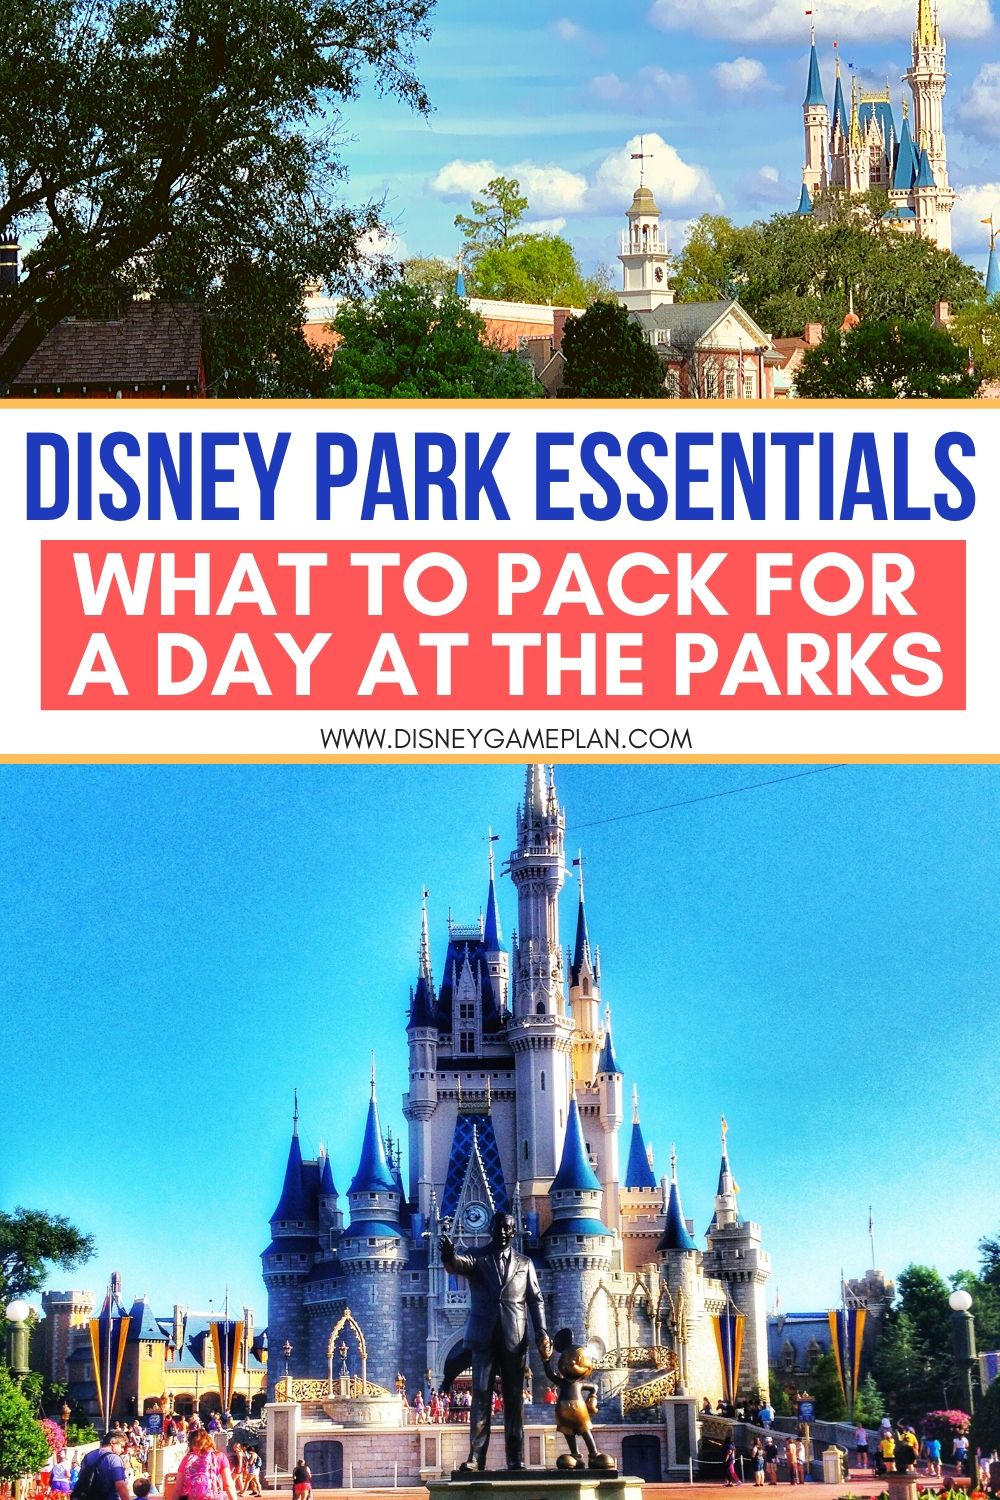 Wondering What to Pack for Disney Parks? Pack These Essentials in your park bag before you head to Disney World for the day. 